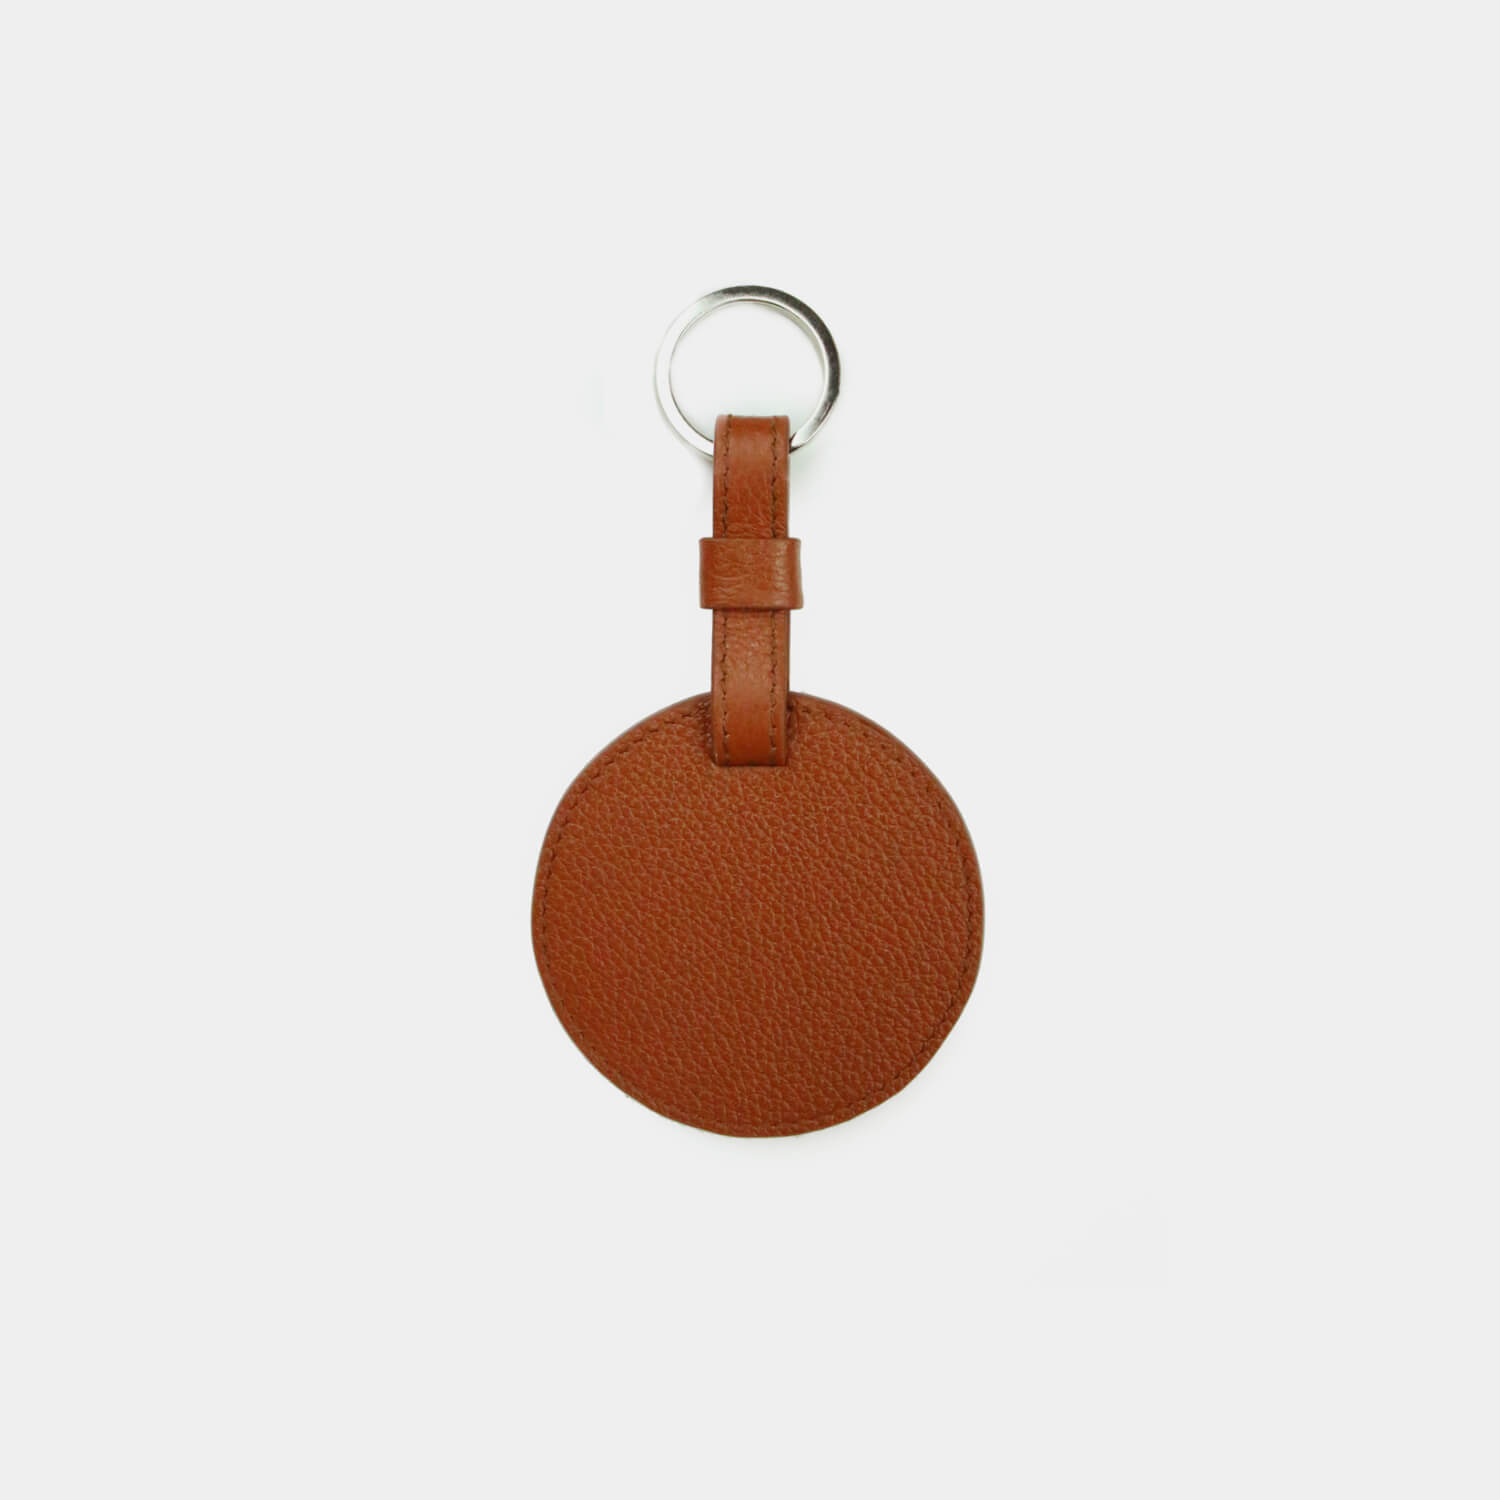 Fine grain leather round keyring with gold or silver split ring, branded with your company logo